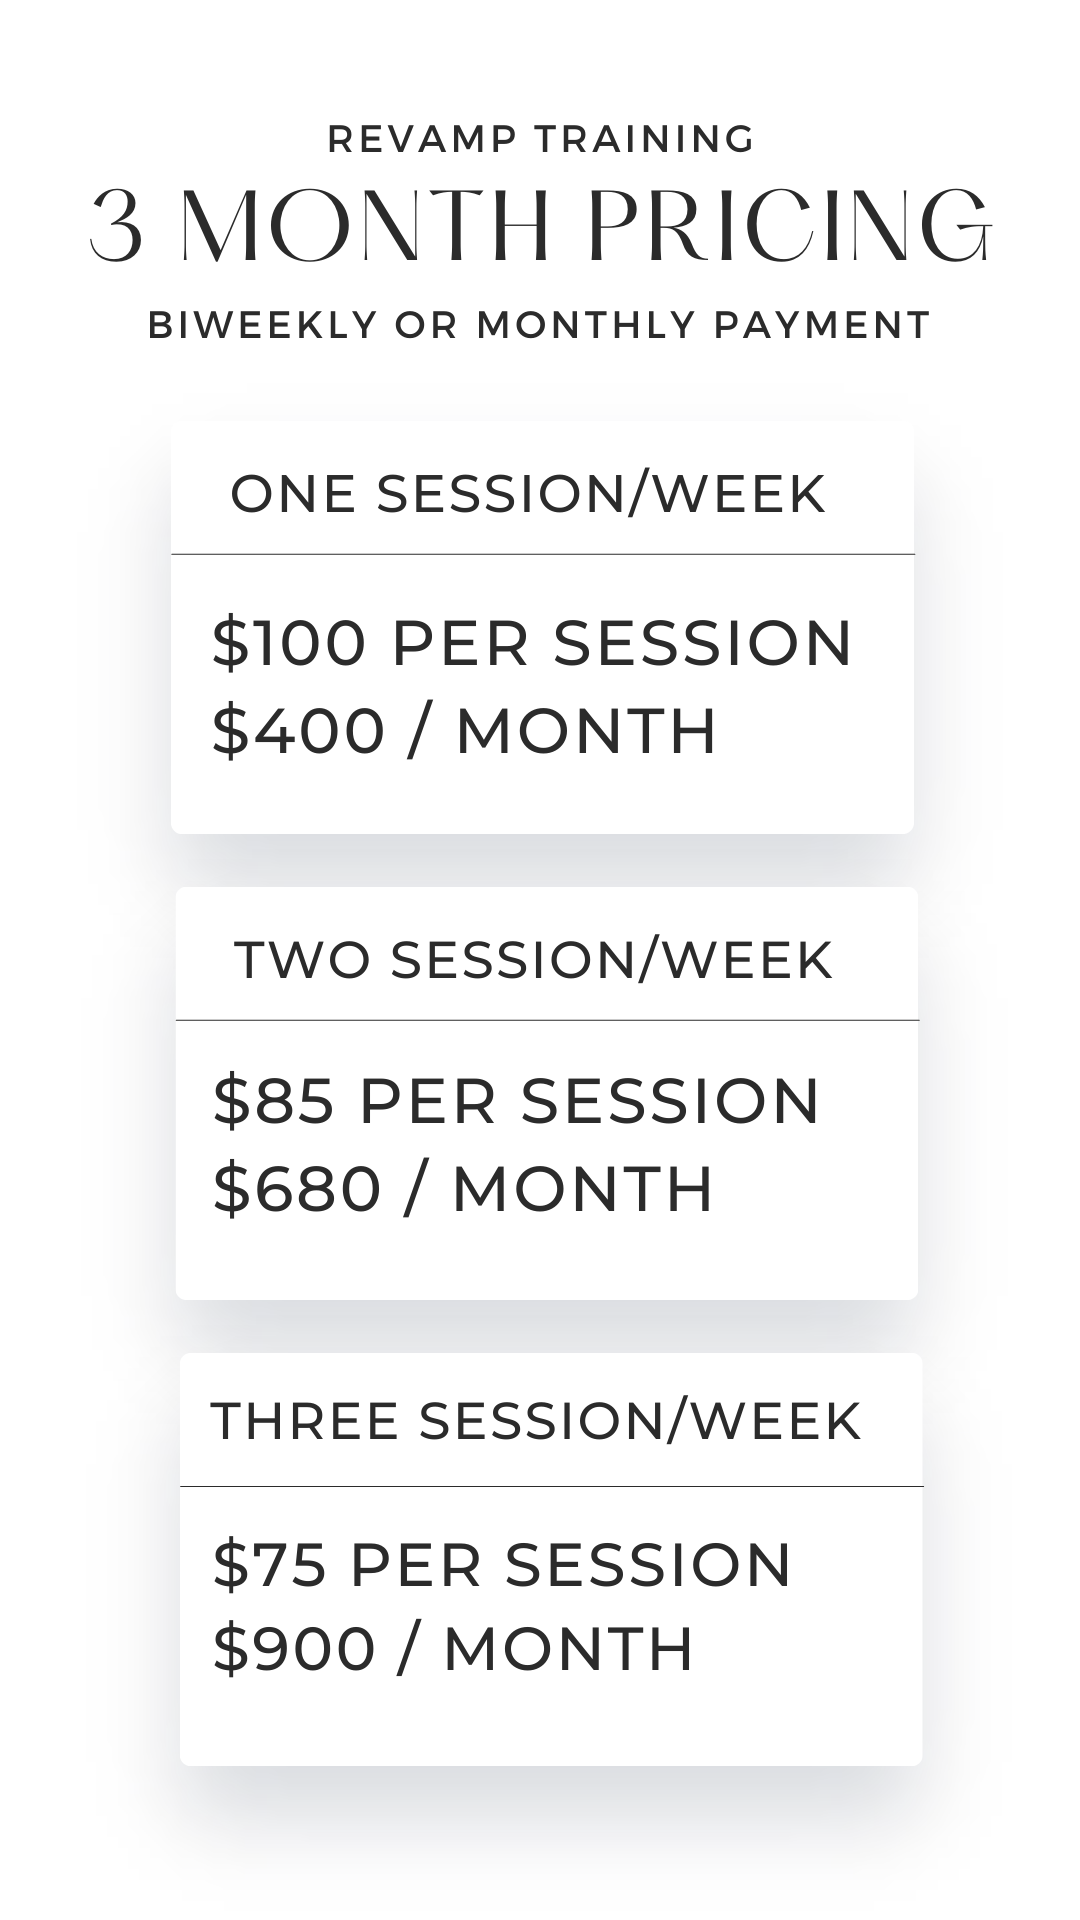 3 month pricing image